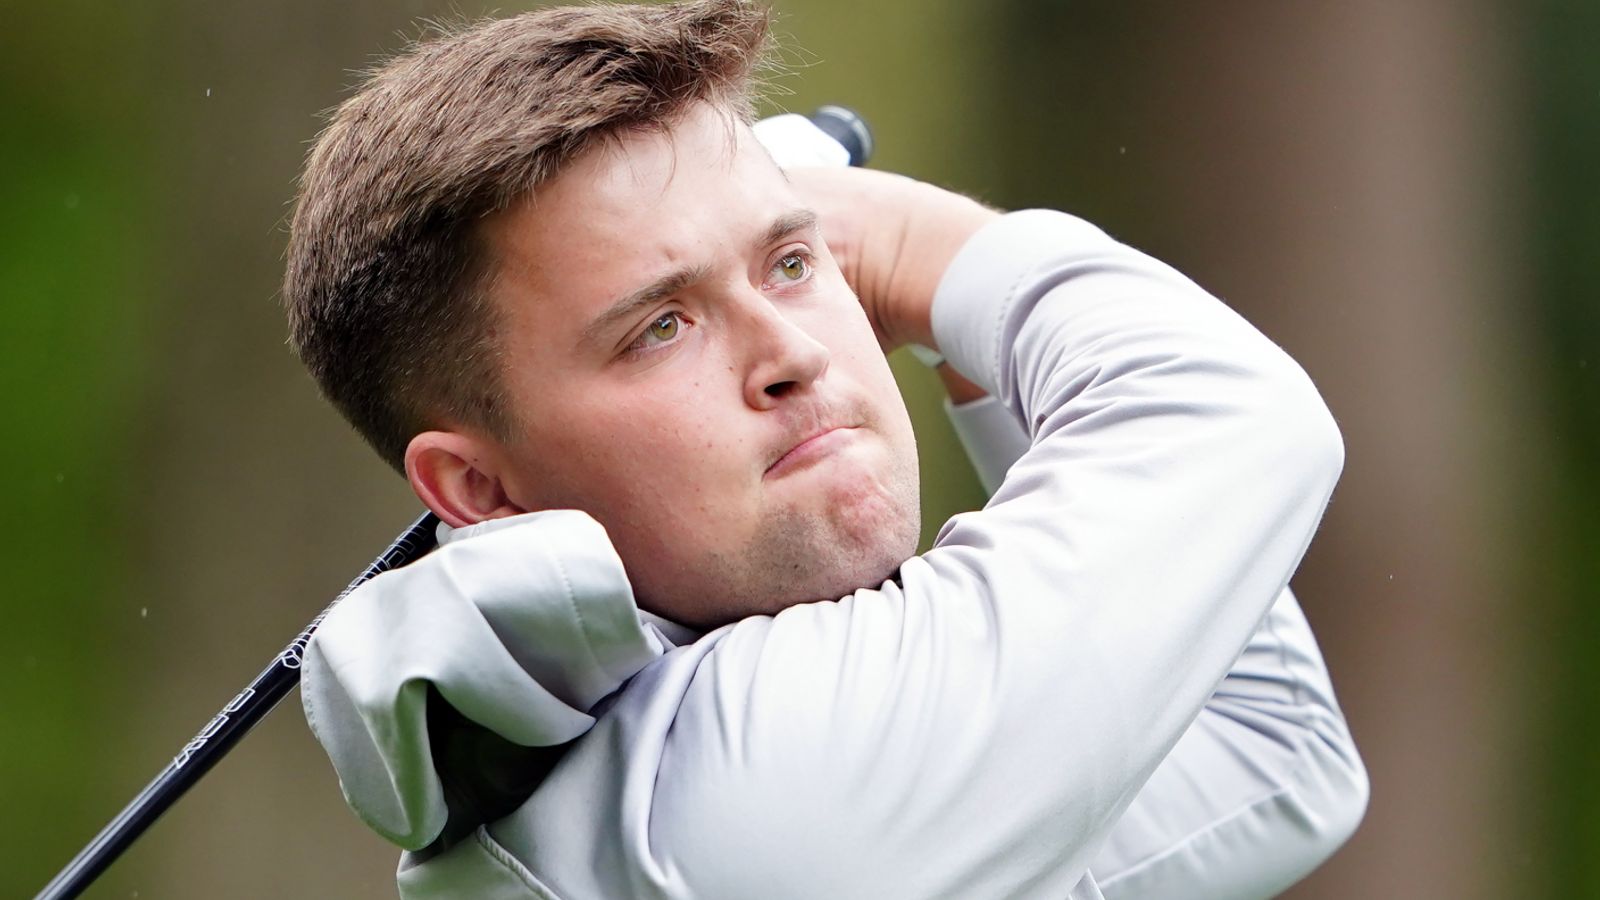 Kipp Popert and Brendan Lawlor share the lead at the inaugural G4D Open at Woburn

